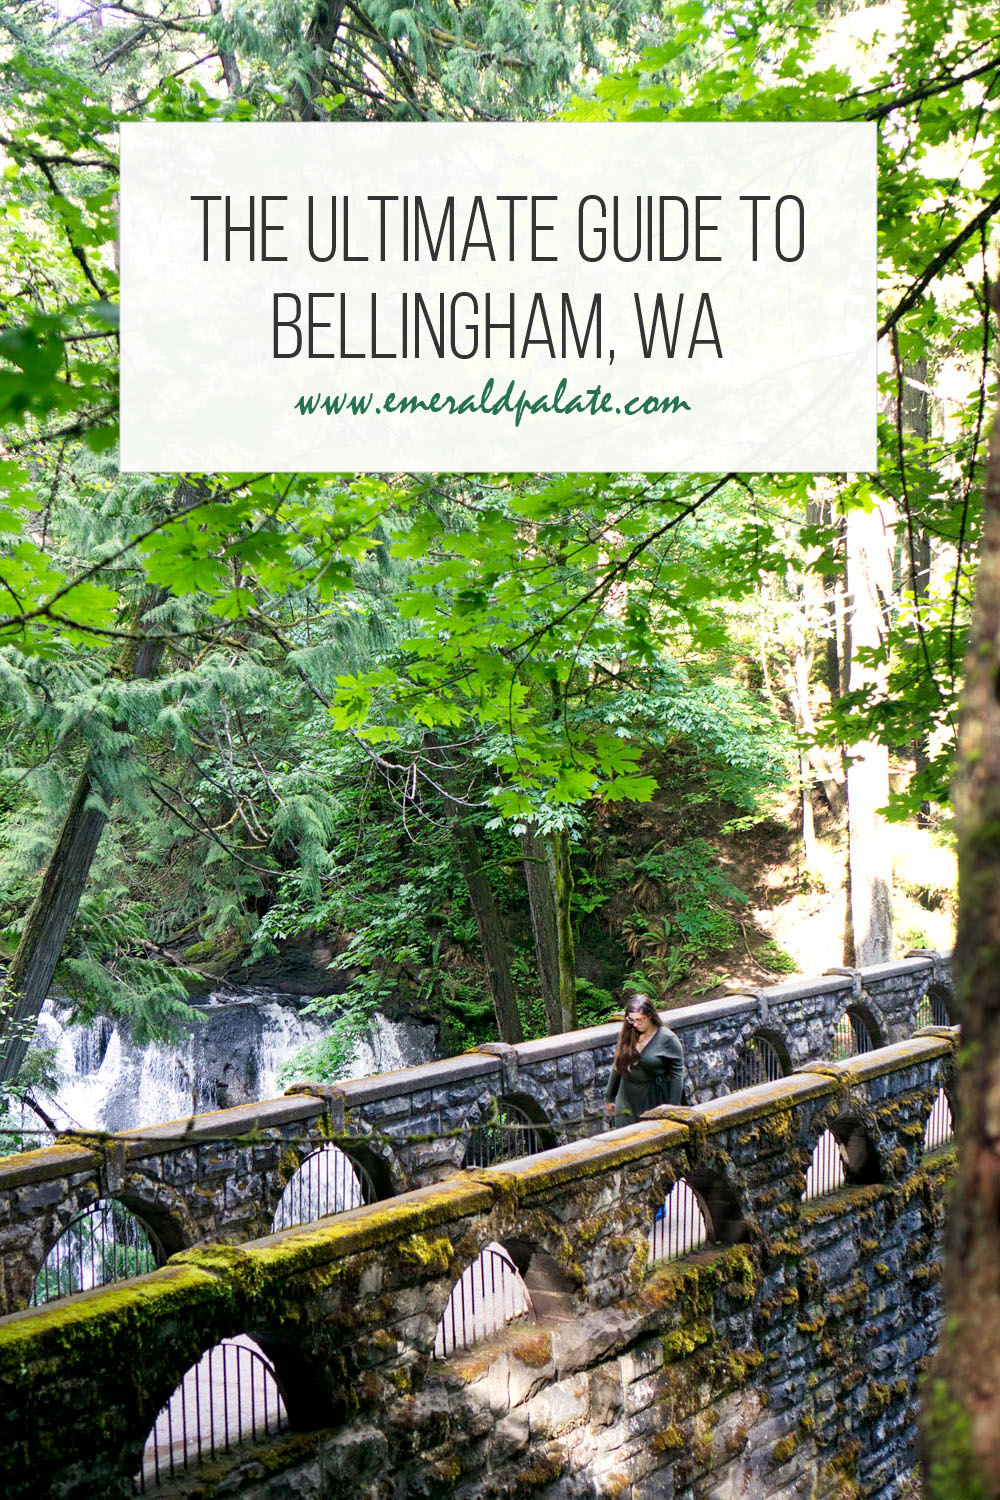 The ultimate Bellingham guide, including things to do in Bellingham, the best Bellingham restaurants, arts and culture, hikes, parks, beaches, and day trips. If you always wanted to visit Bellingham in Washington state, use this guide to Bellingham before you go!